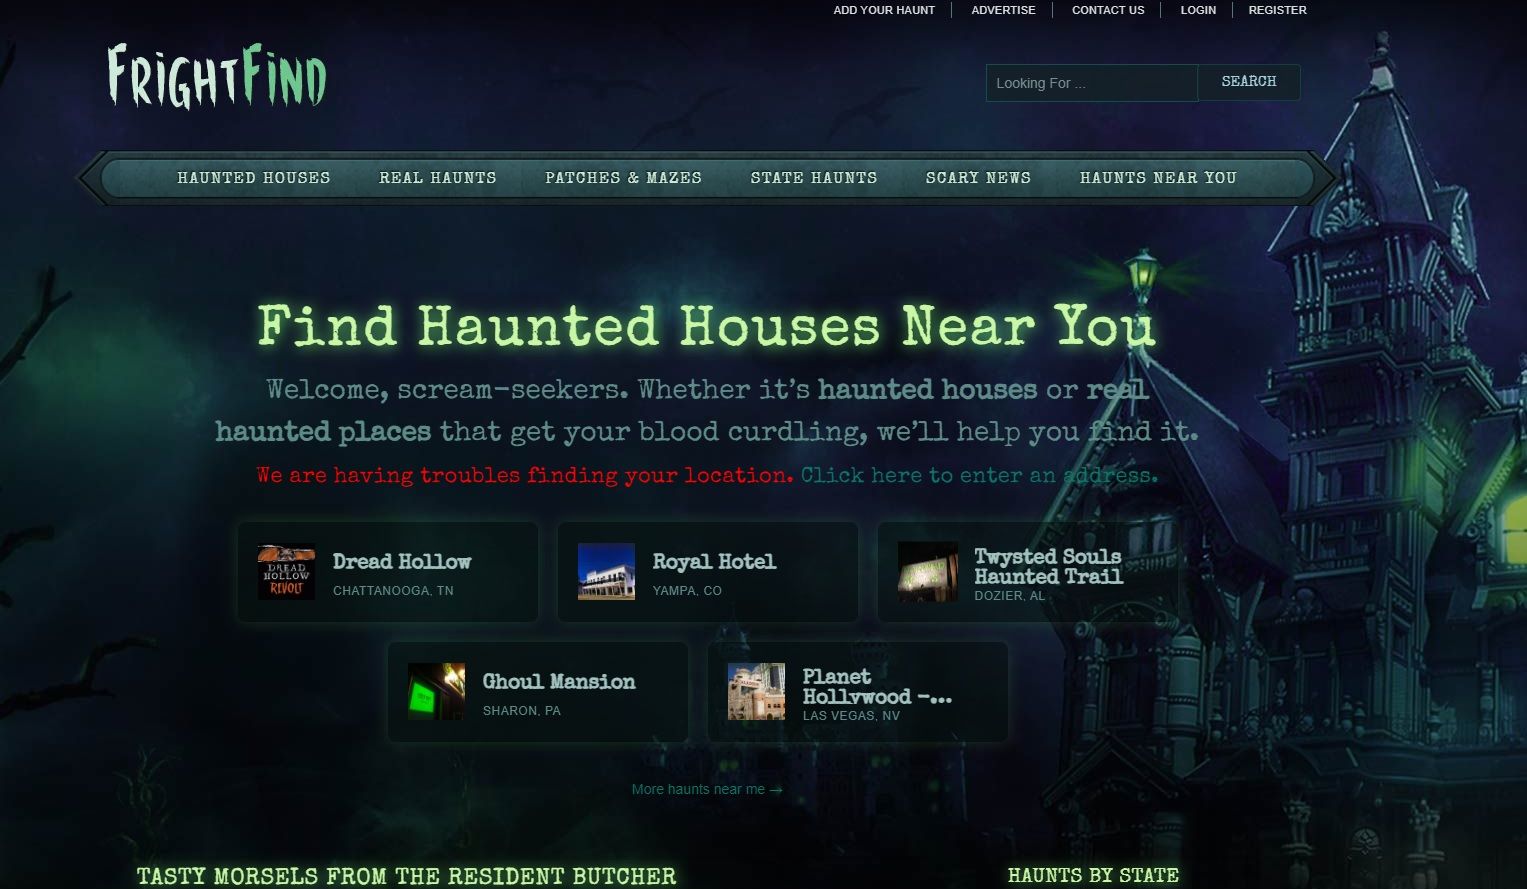 Fright Find homepage